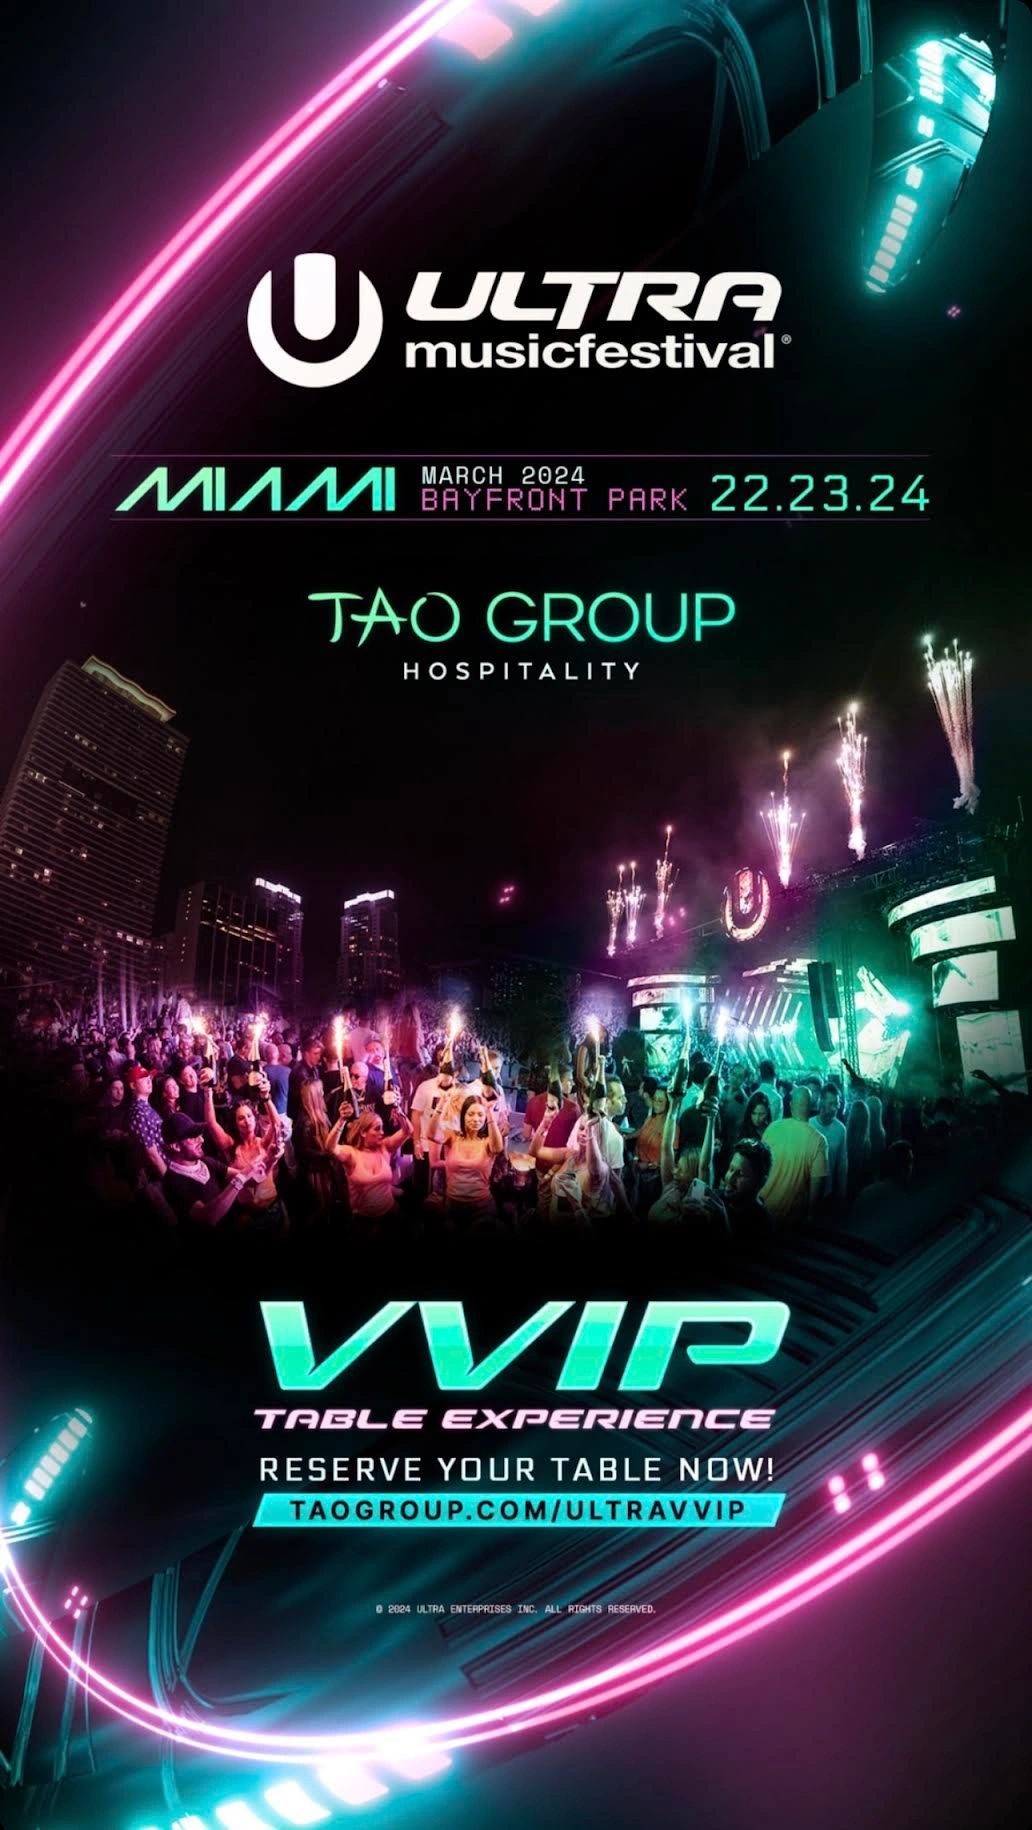 Cream Entertainment presents Ultra Miami sponsored by Tao Group Hospitality March 22-24, 2024 